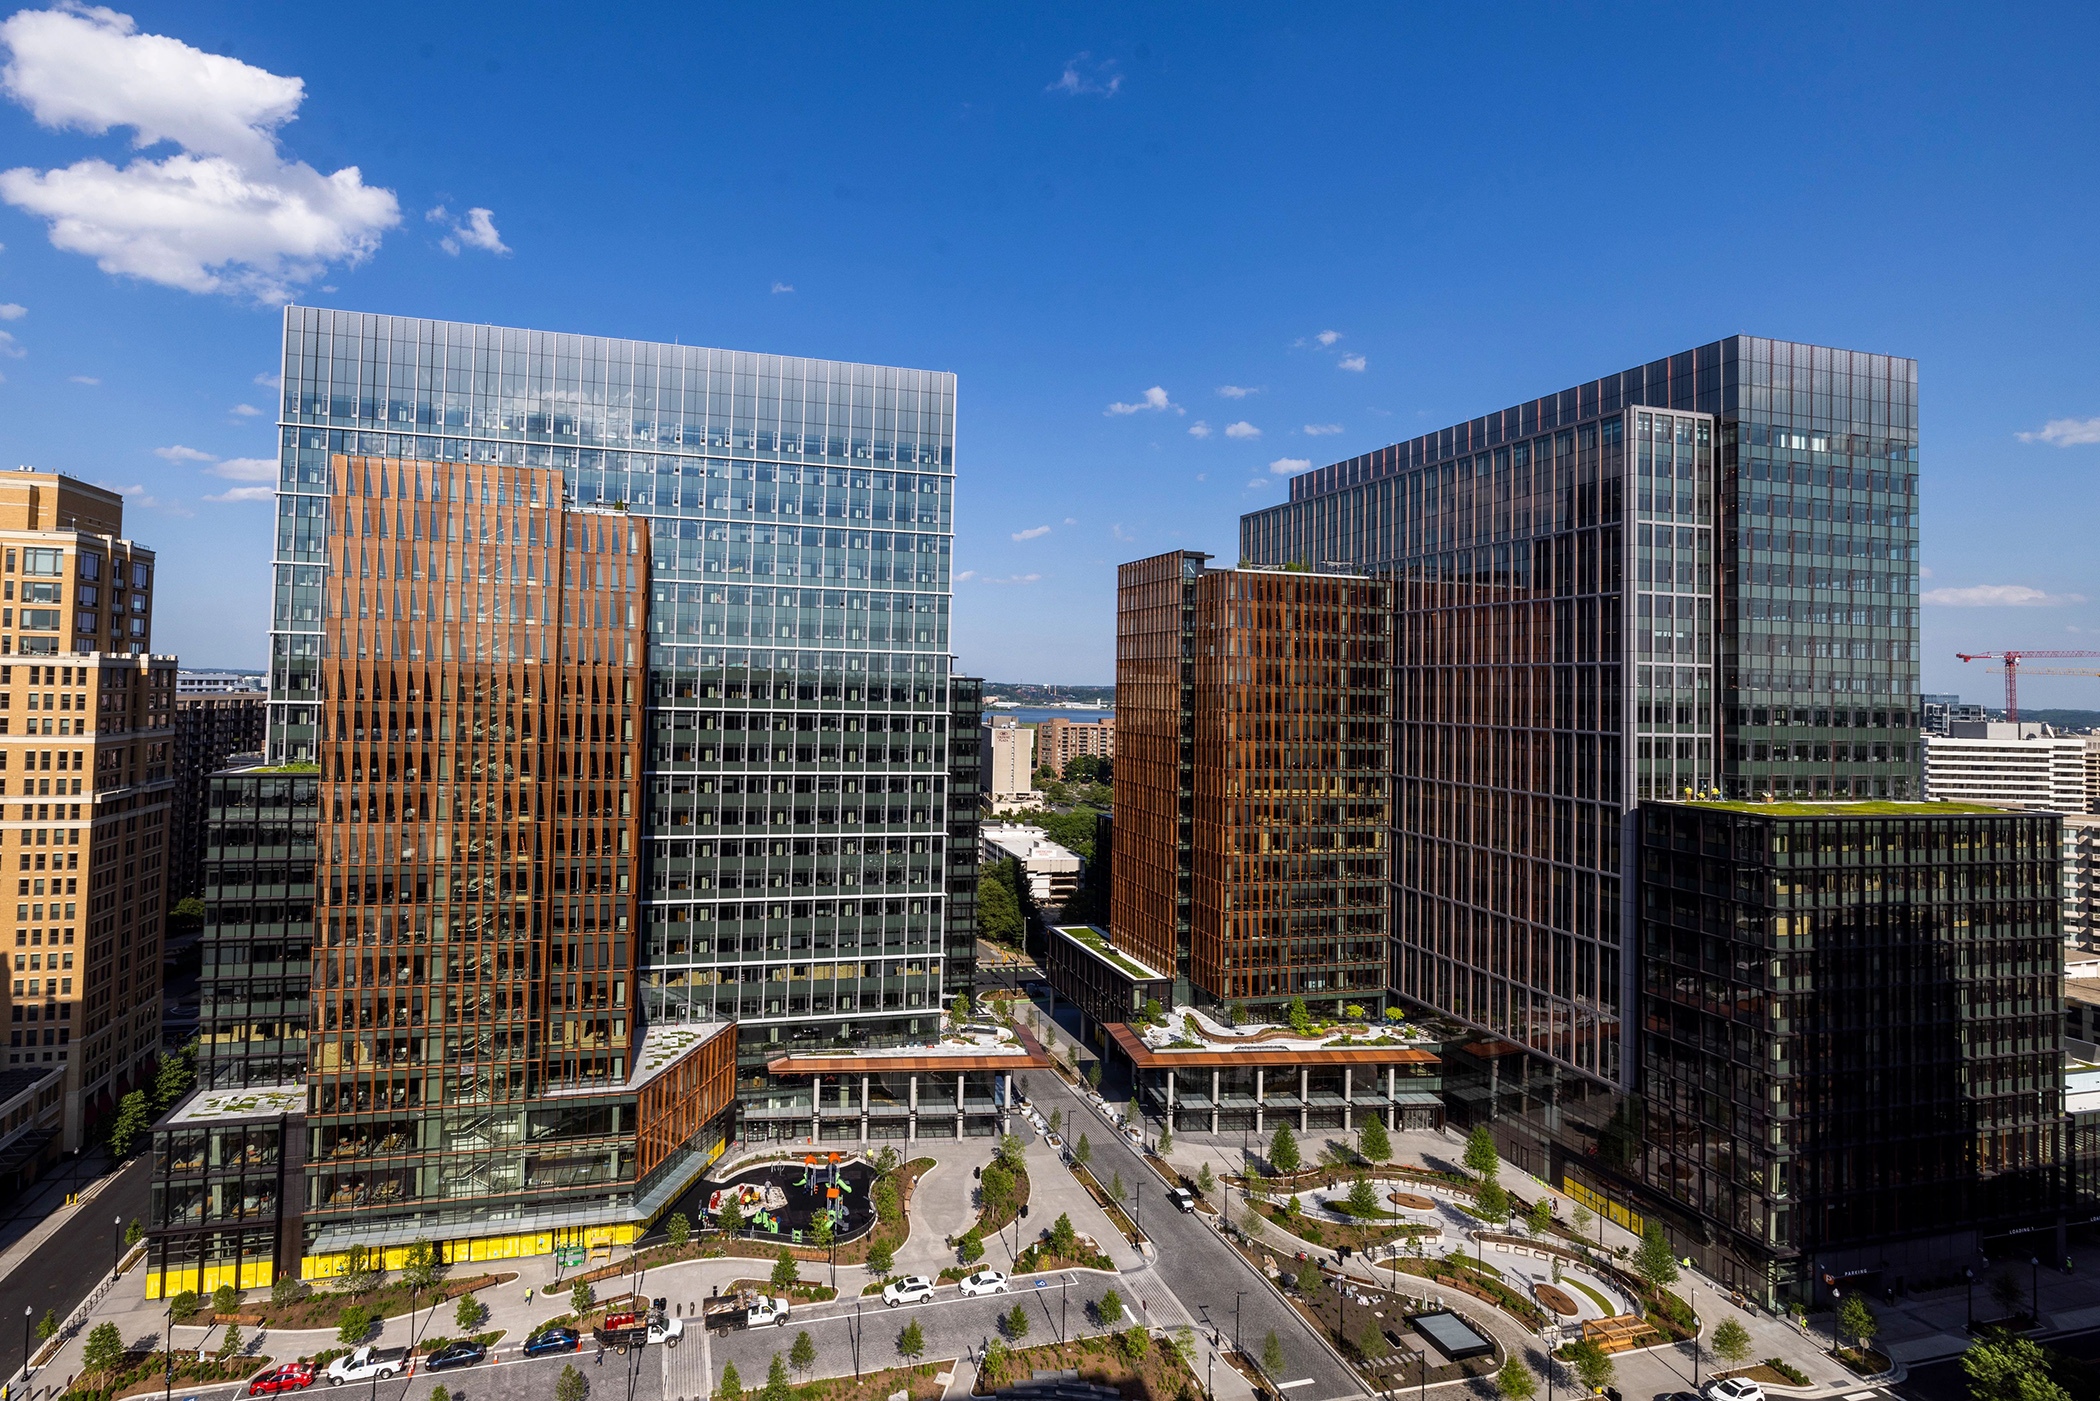 Amazon this week started moving employees into two new towers at its East Coast headquarters in Arlington, Virginia. (Lucas Jackson/Amazon)